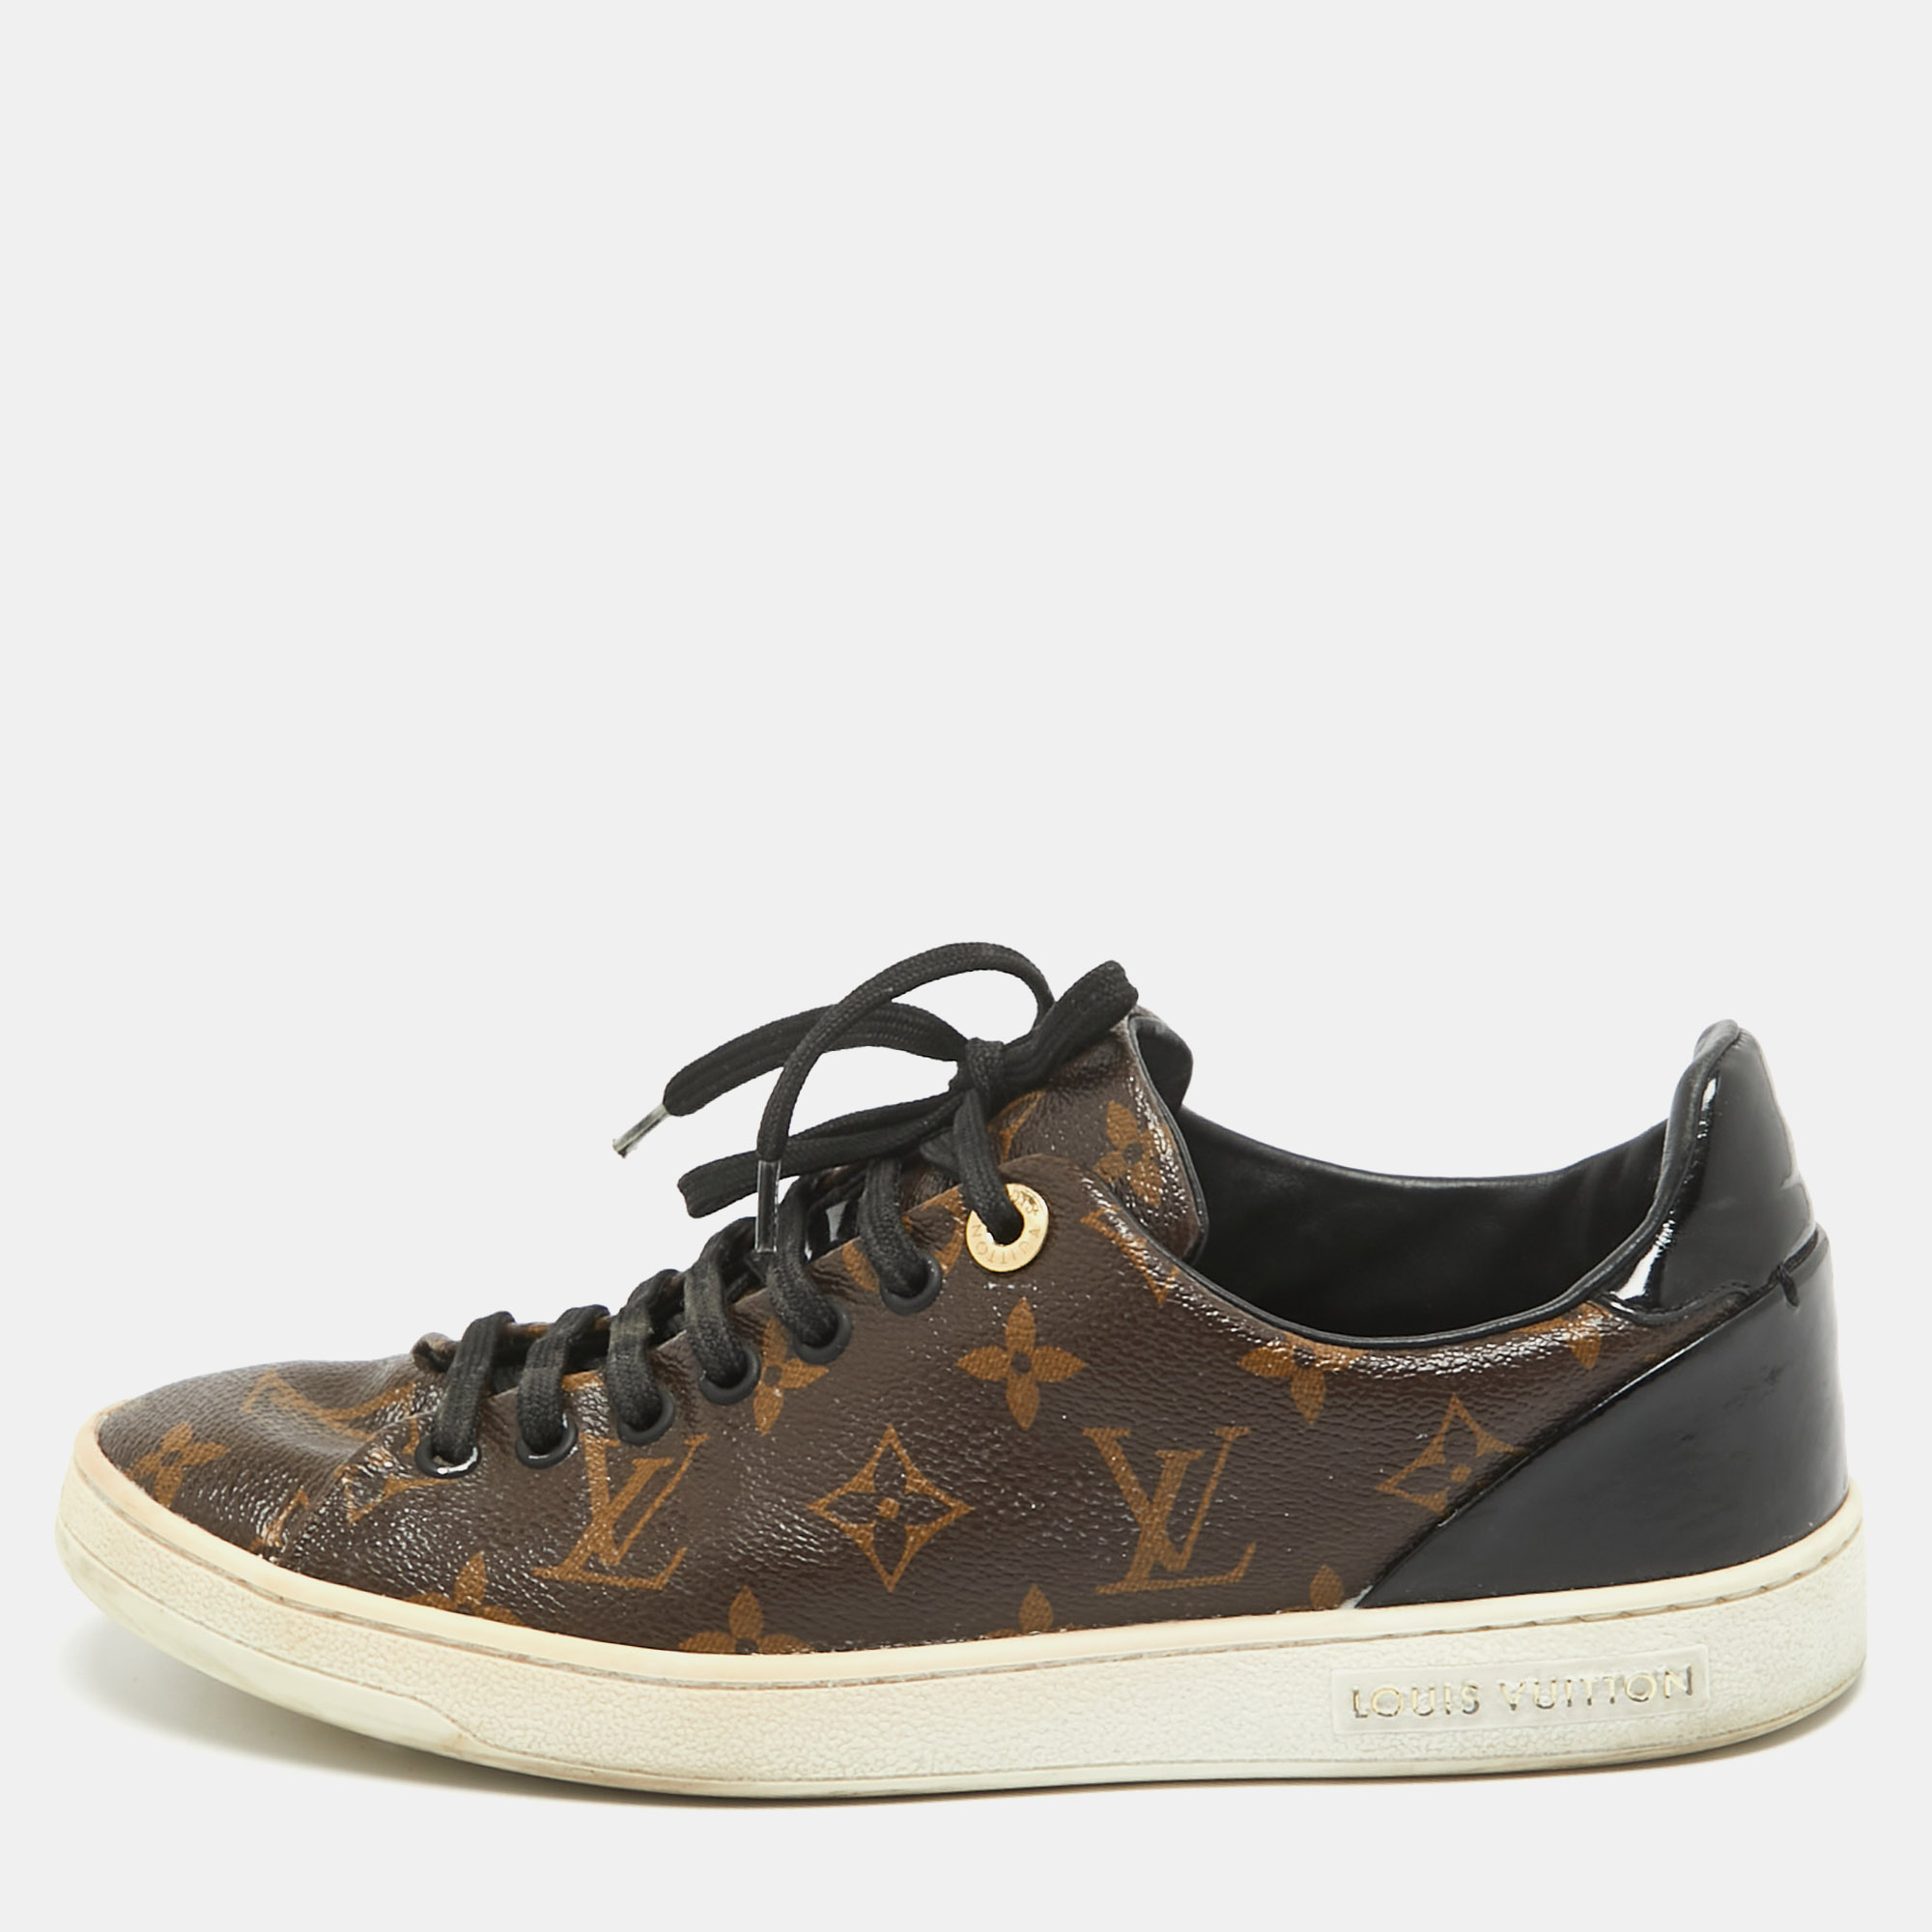 Louis vuitton brown/black monogram canvas and patent frontrow sneakers size 37.5